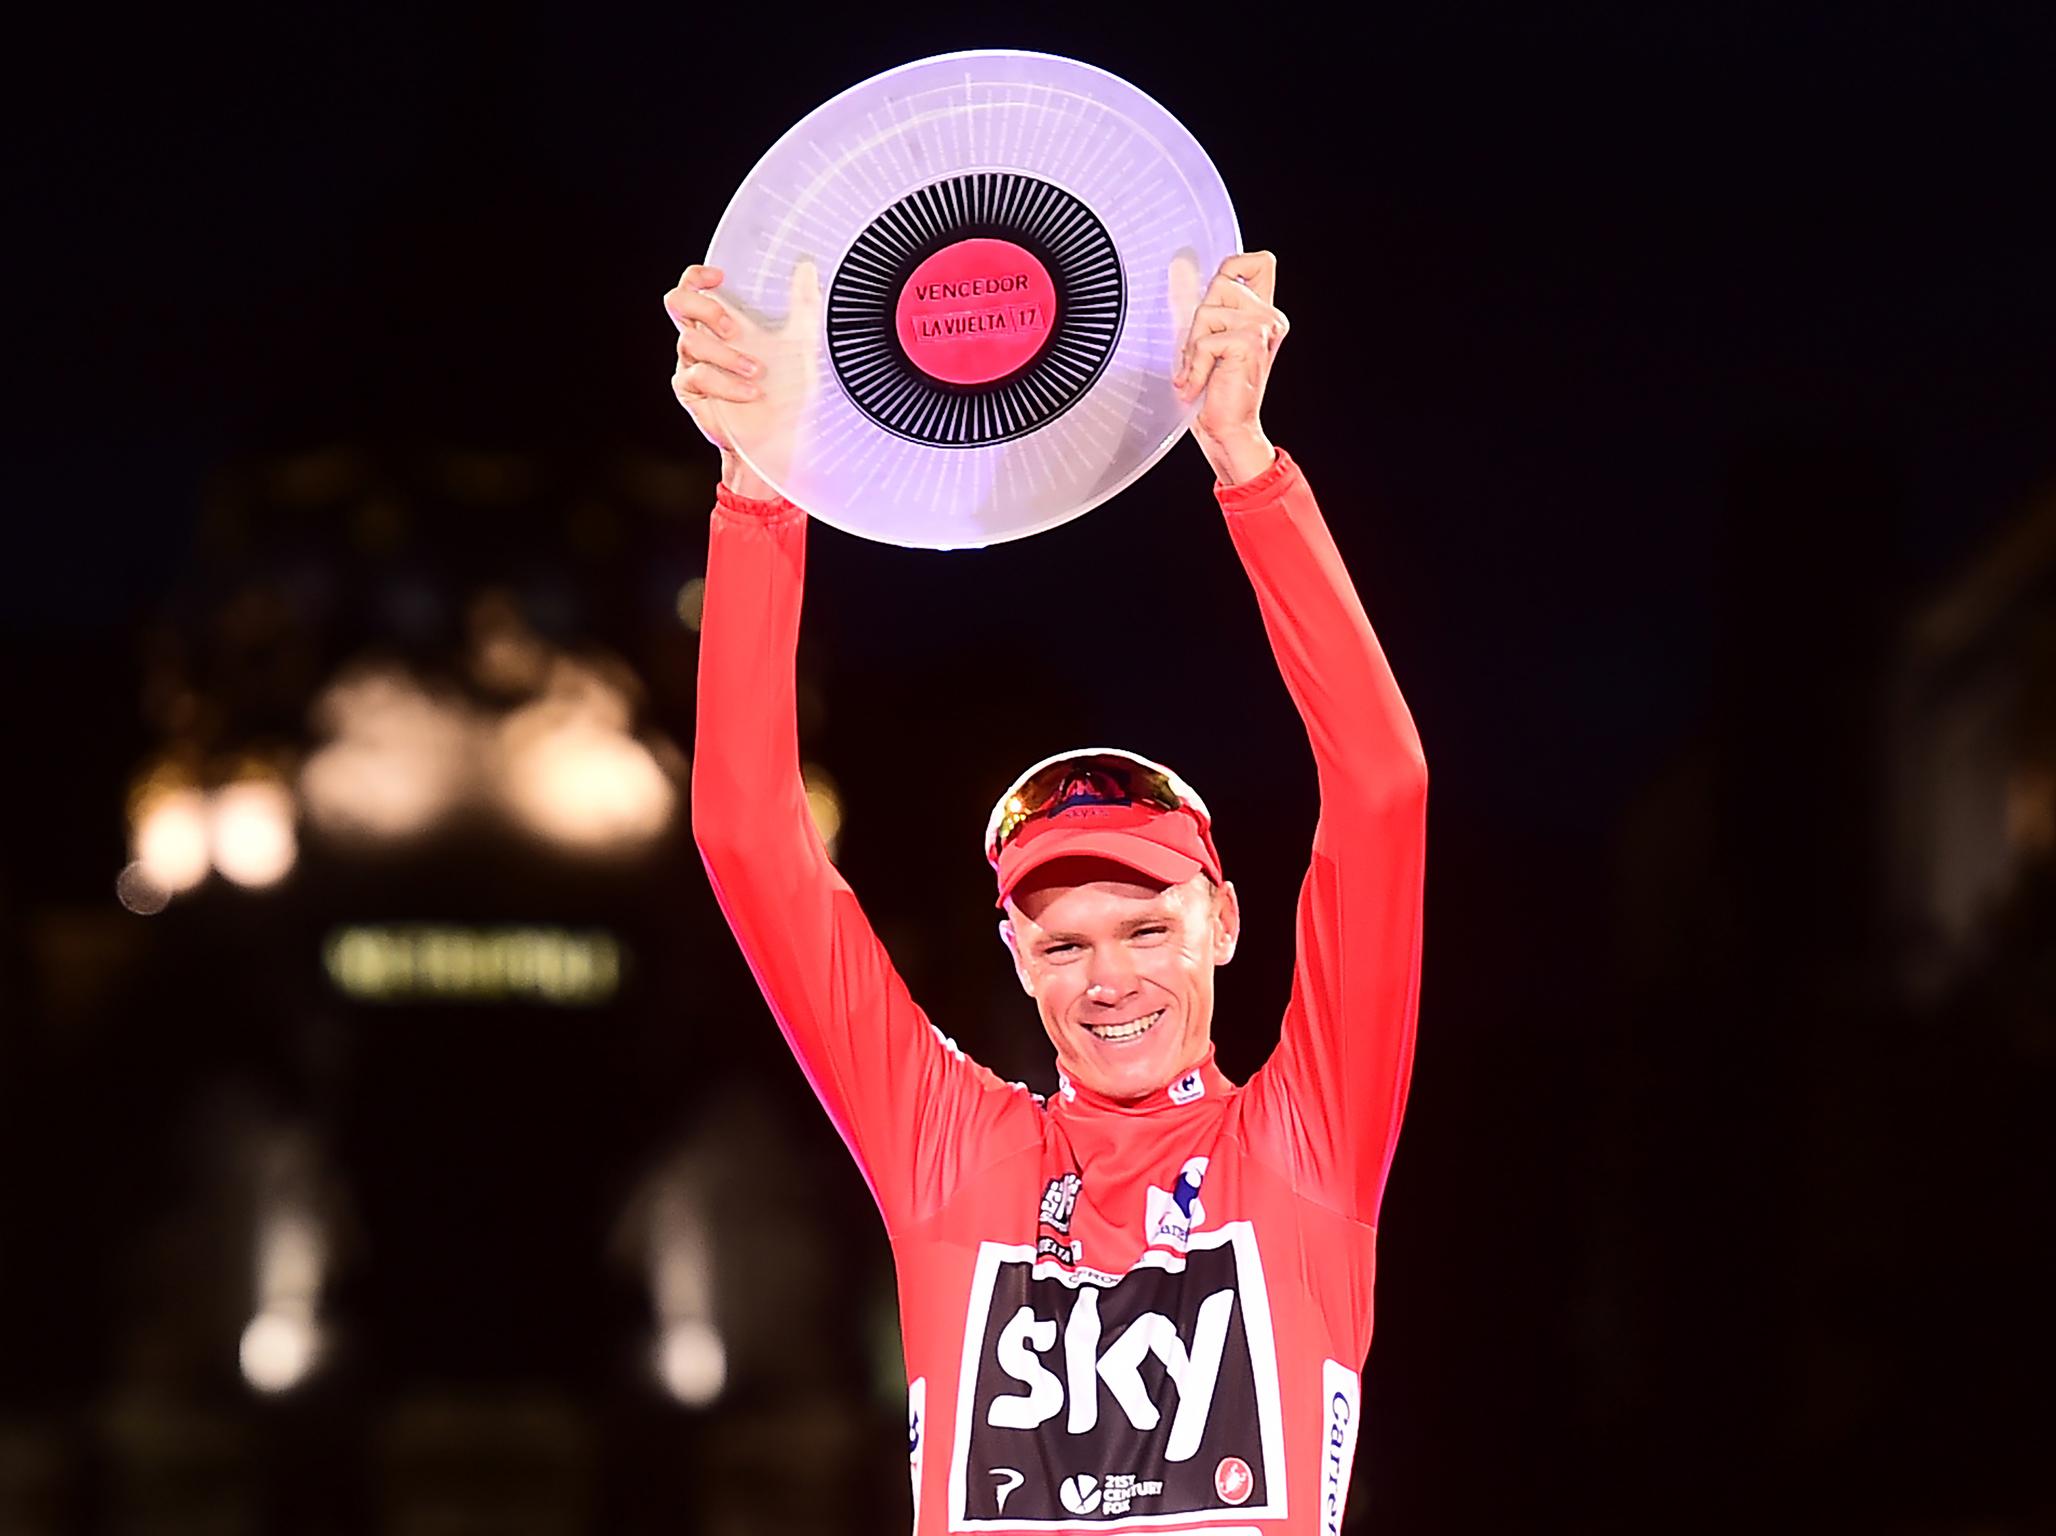 Froome won the Vuelta a Espana in 2017